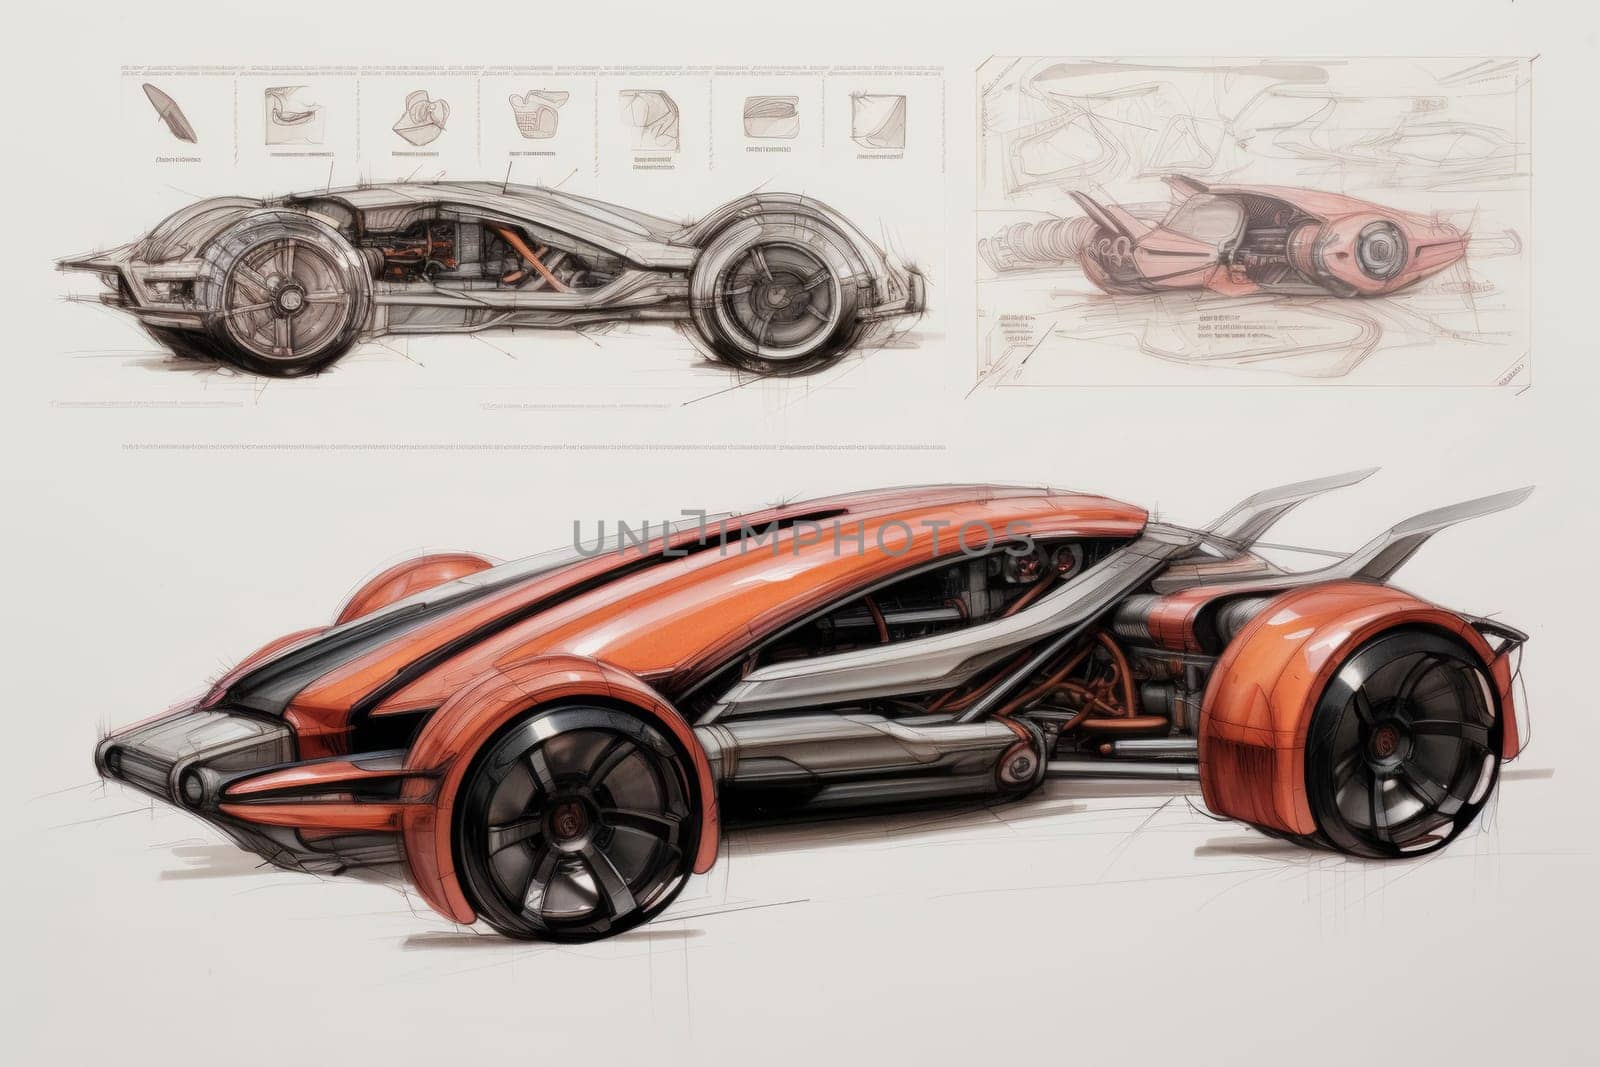 Detailed concept sketches of a futuristic vehicle design lay spread out, showcasing the creative process. The intricate drawings reveal a sleek, innovative car with annotations